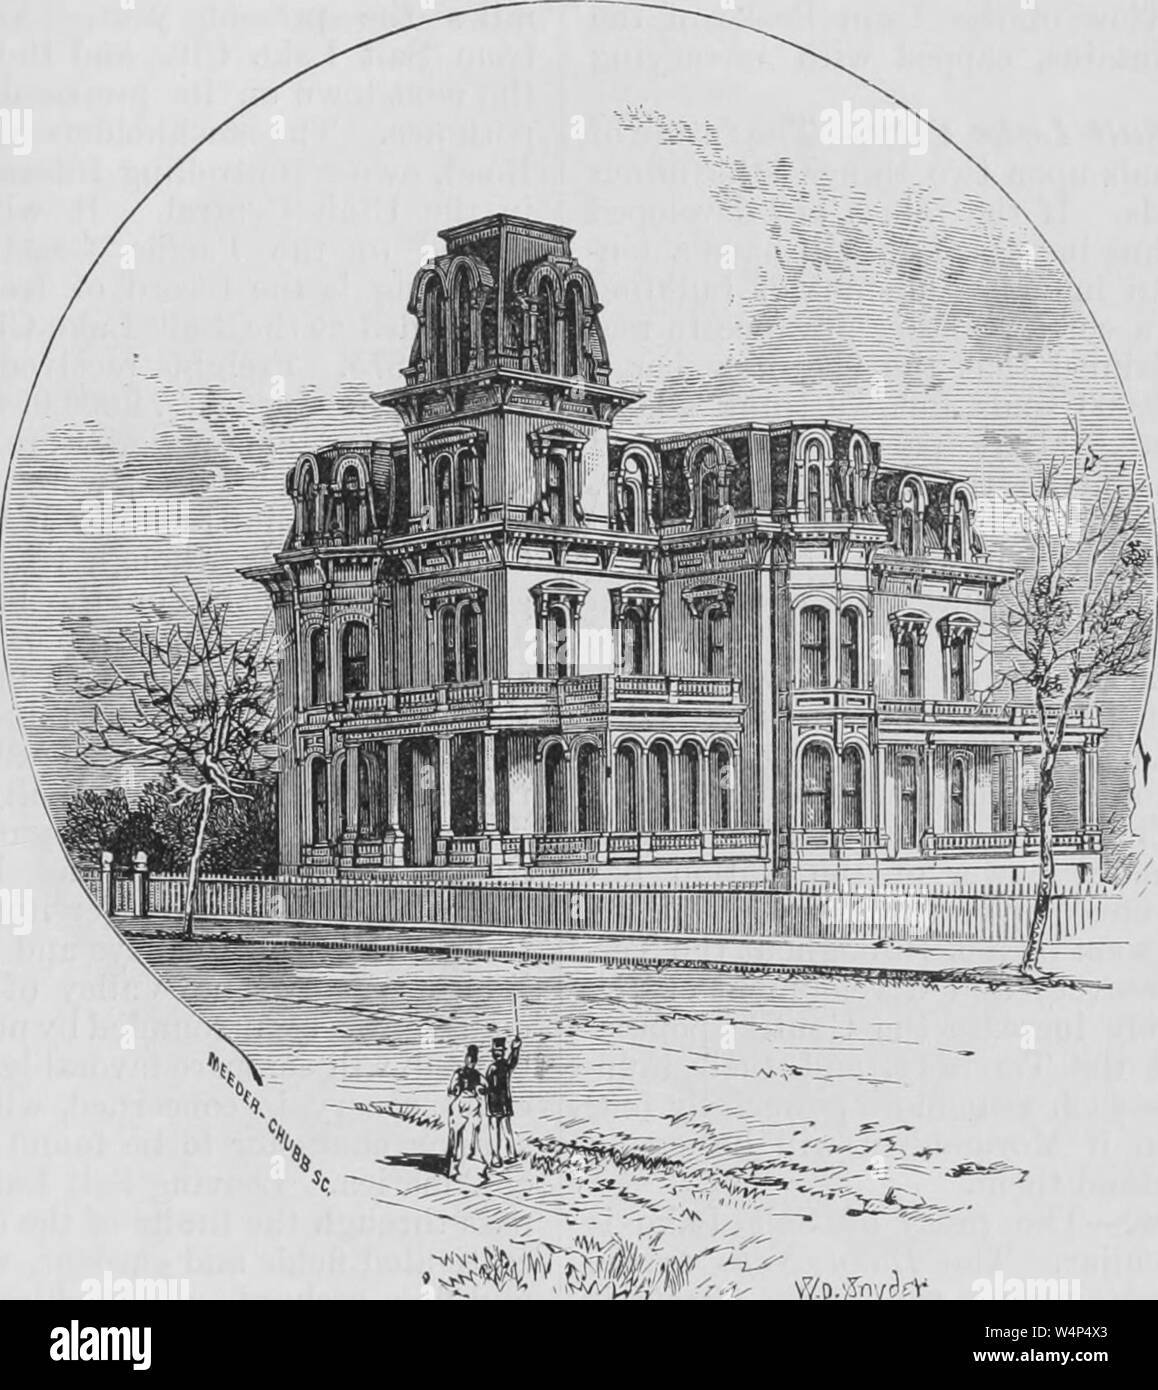 Engraving of the Amelia Palace, last official residence of Brigham Young, Salt Lake City, Utah, from the book 'The Pacific tourist' by Henry T. Williams, 1878. Courtesy Internet Archive. () Stock Photo